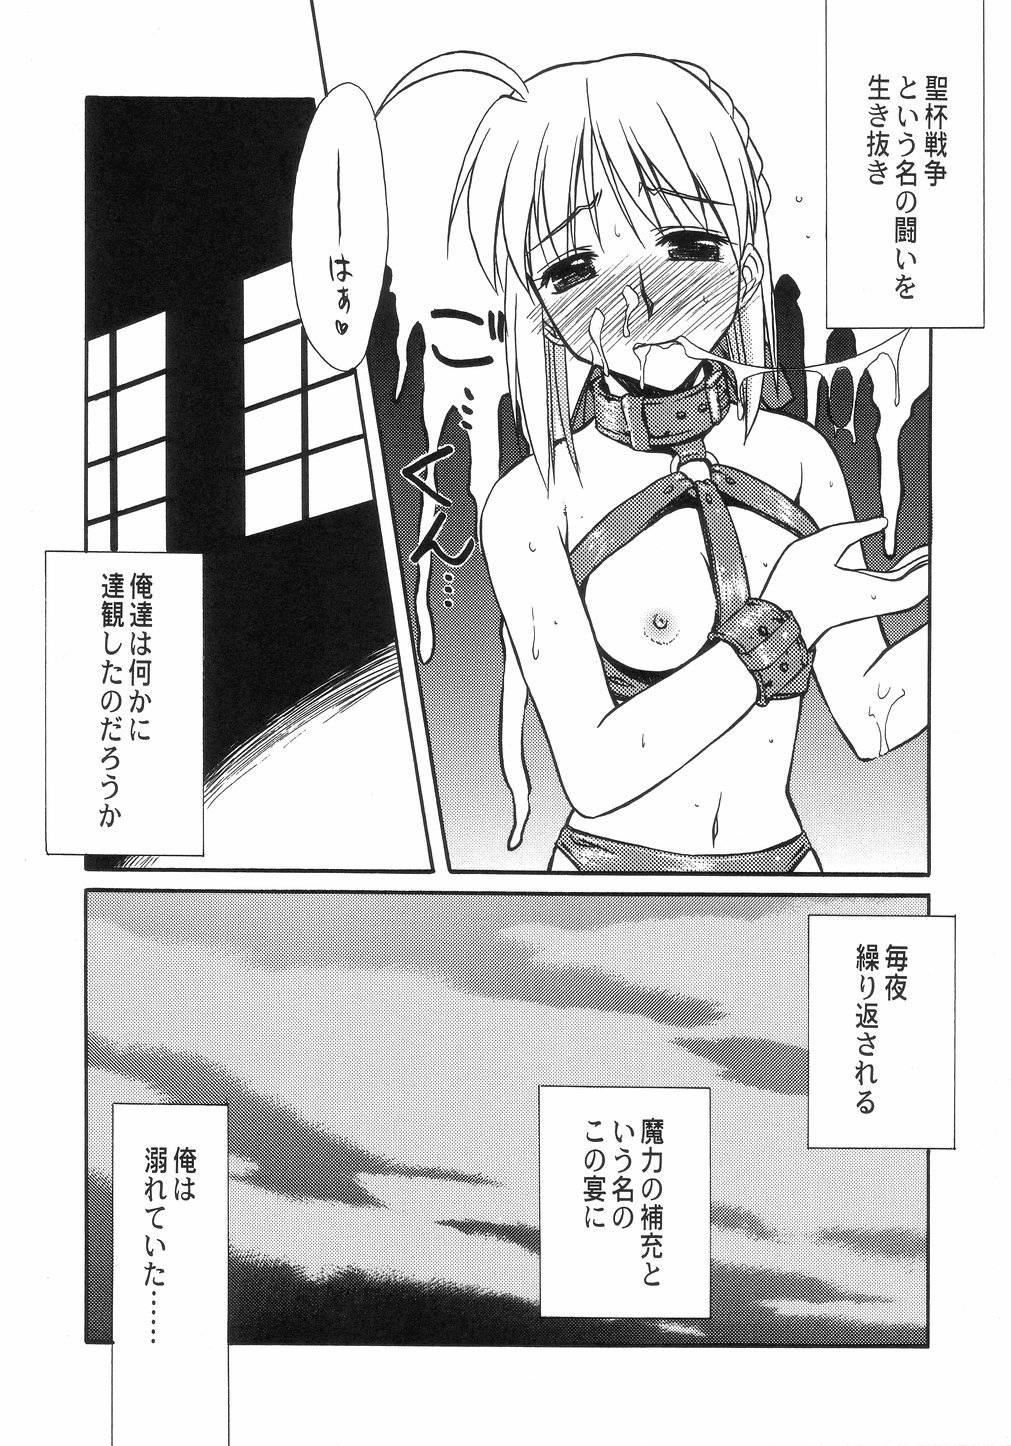 Sloppy Figure - Fate stay night Hand - Page 23